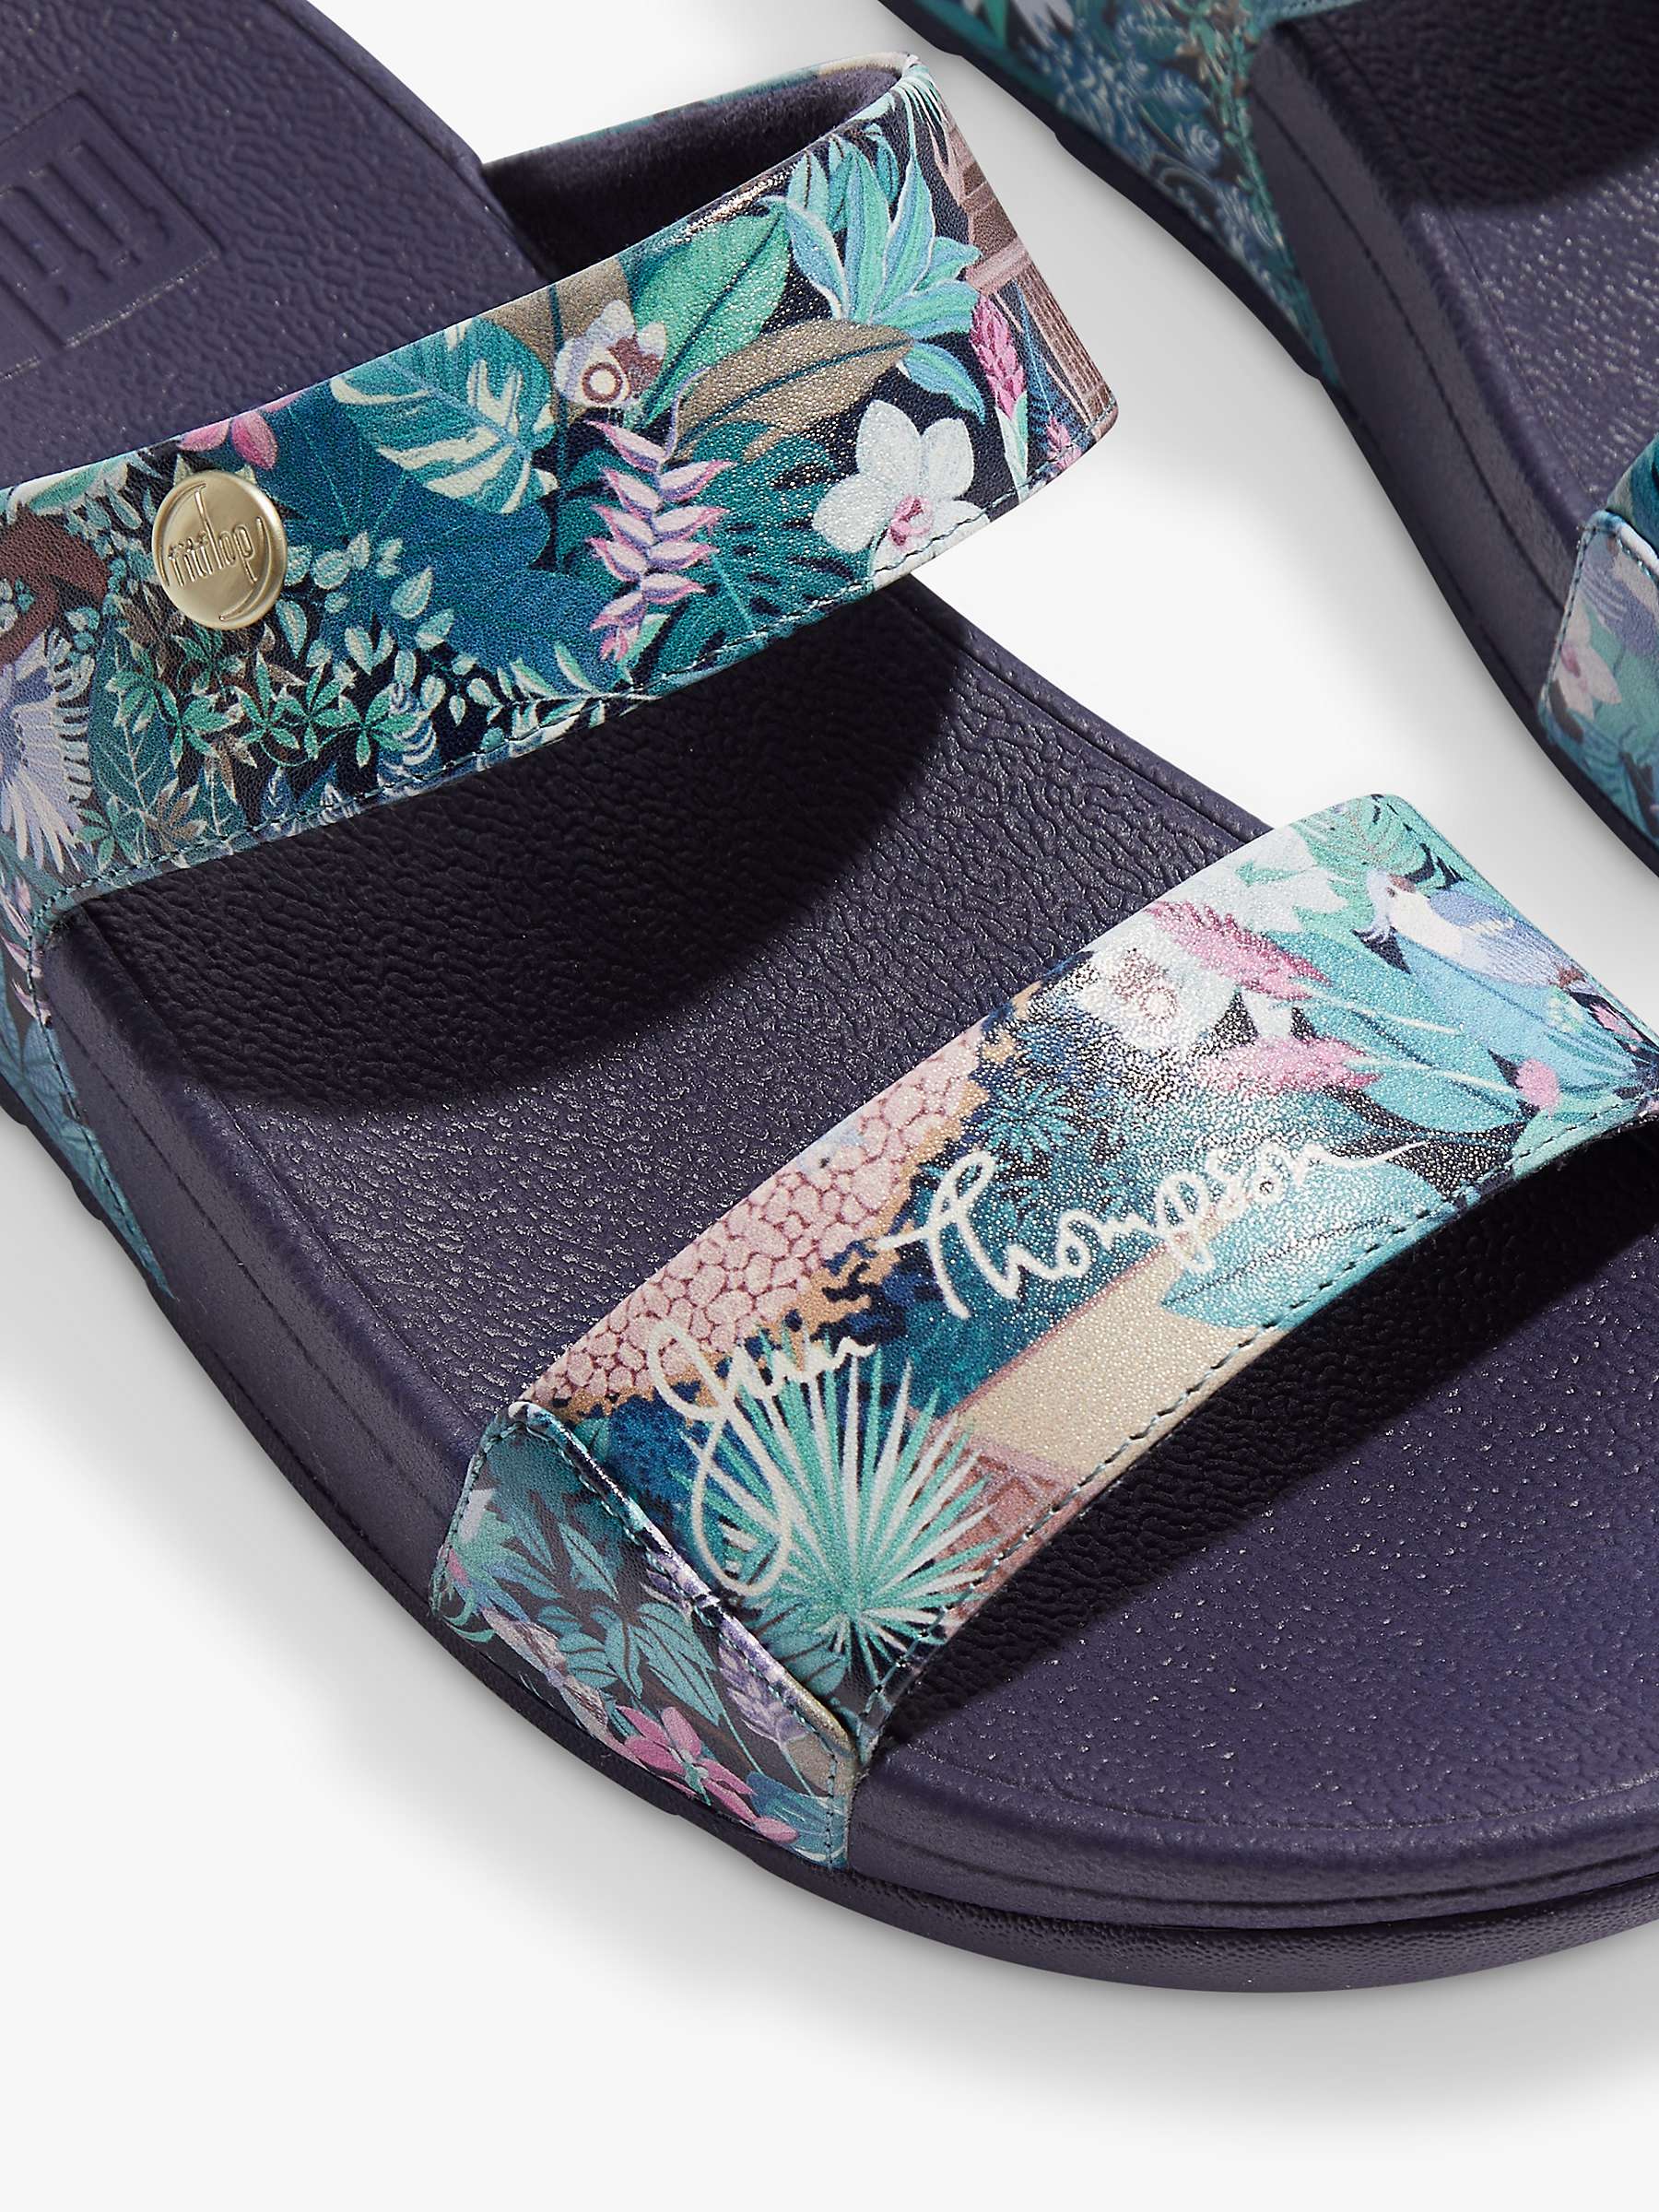 Buy FitFlop Jim Thompson Lulu Floral Leather Sandals Online at johnlewis.com